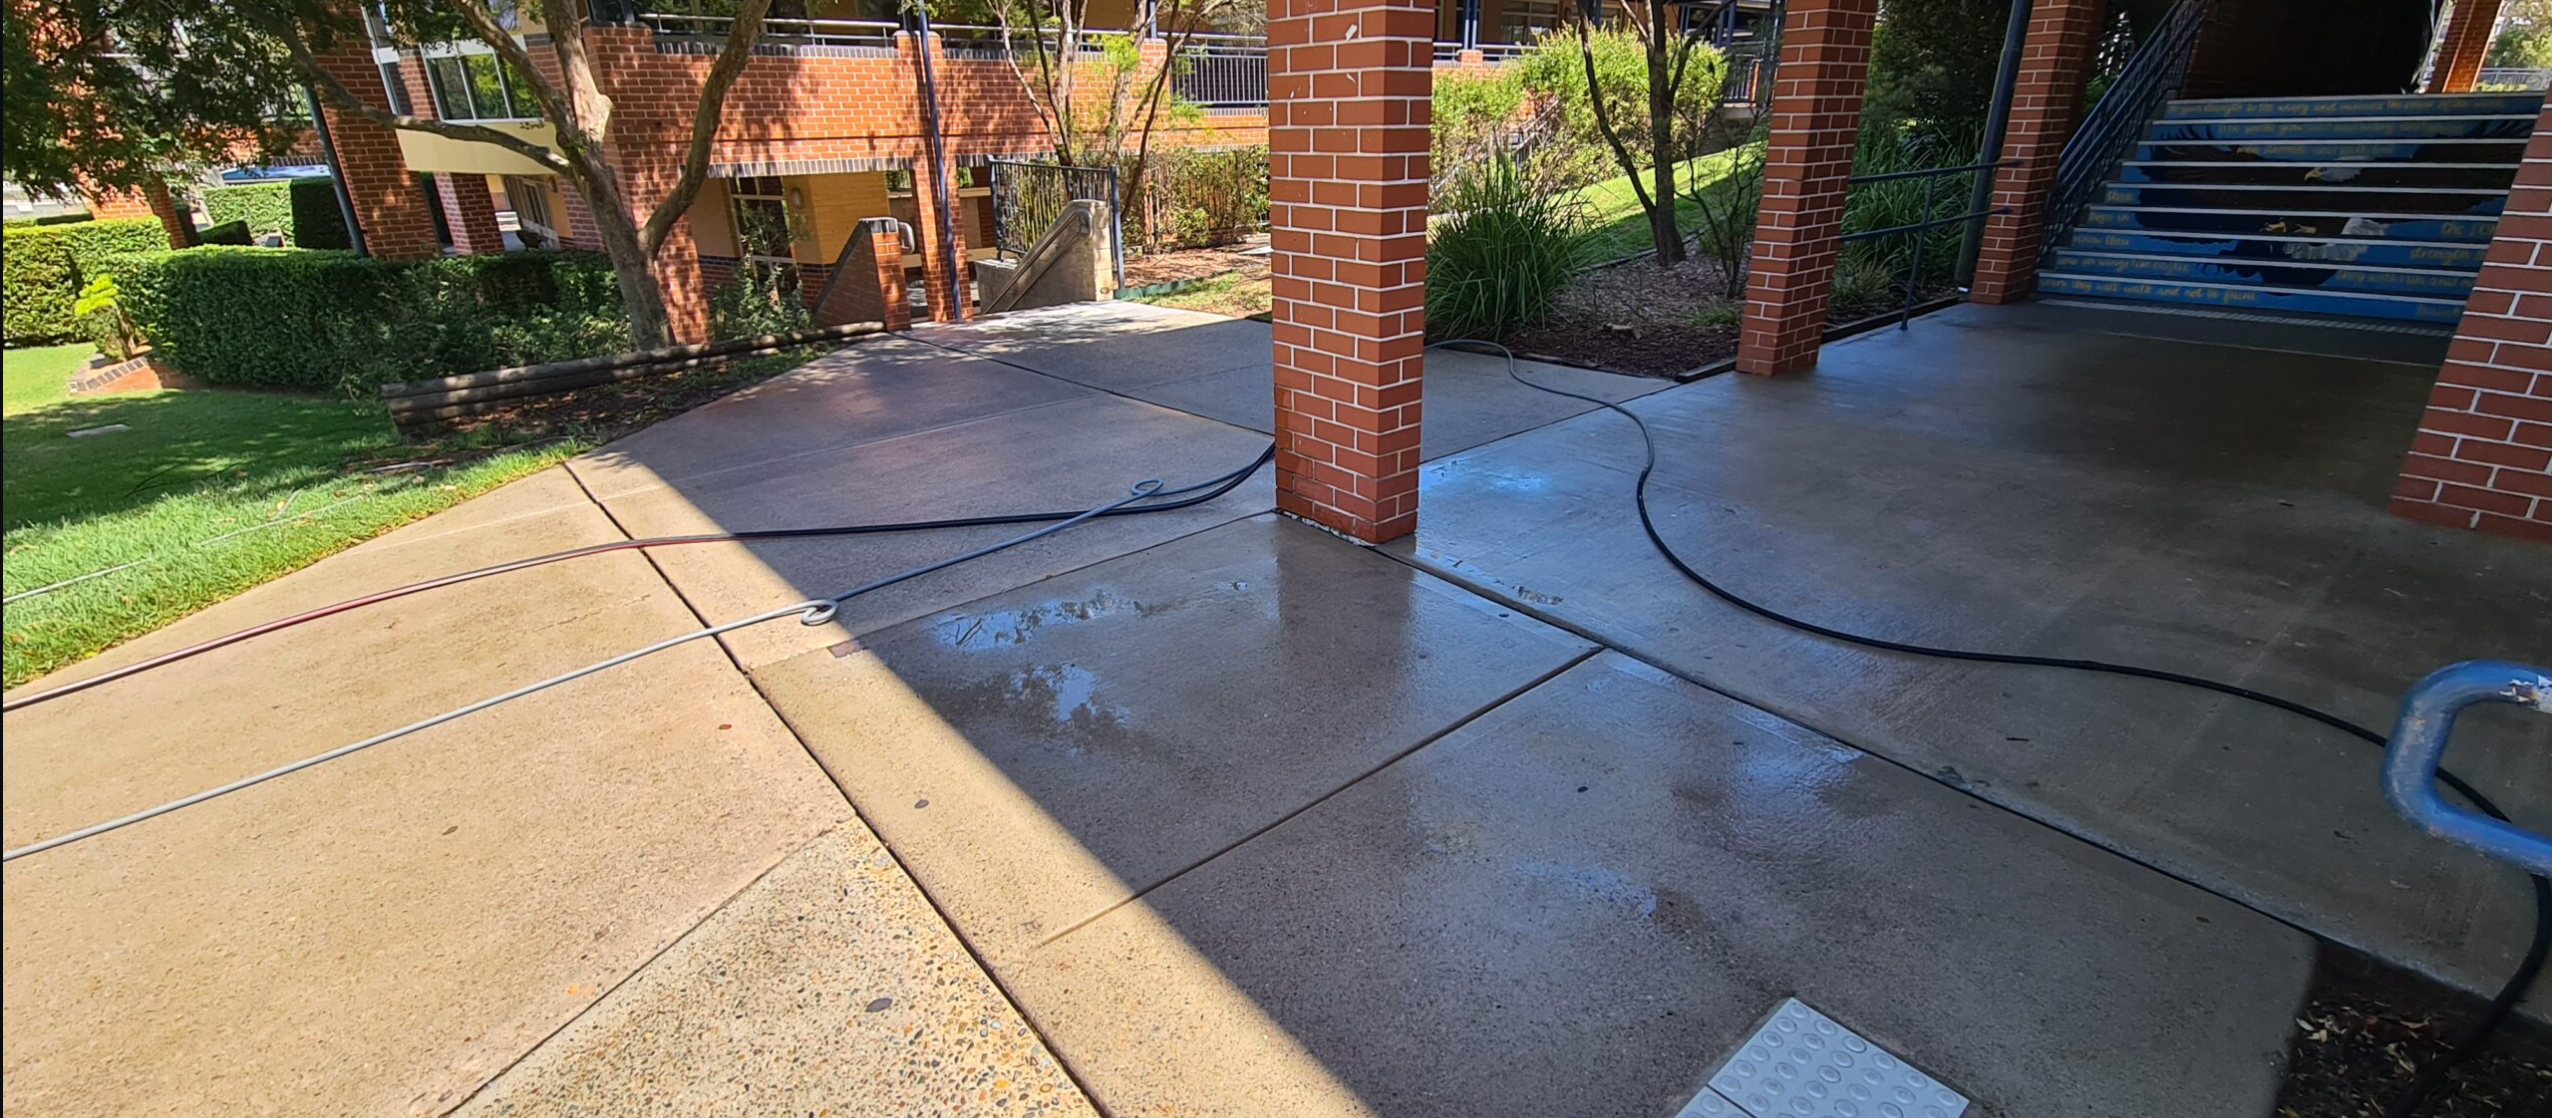 SCHOOLS AND AGED CARE pressure cleaning and washing services in Sydney and surrounding areas.